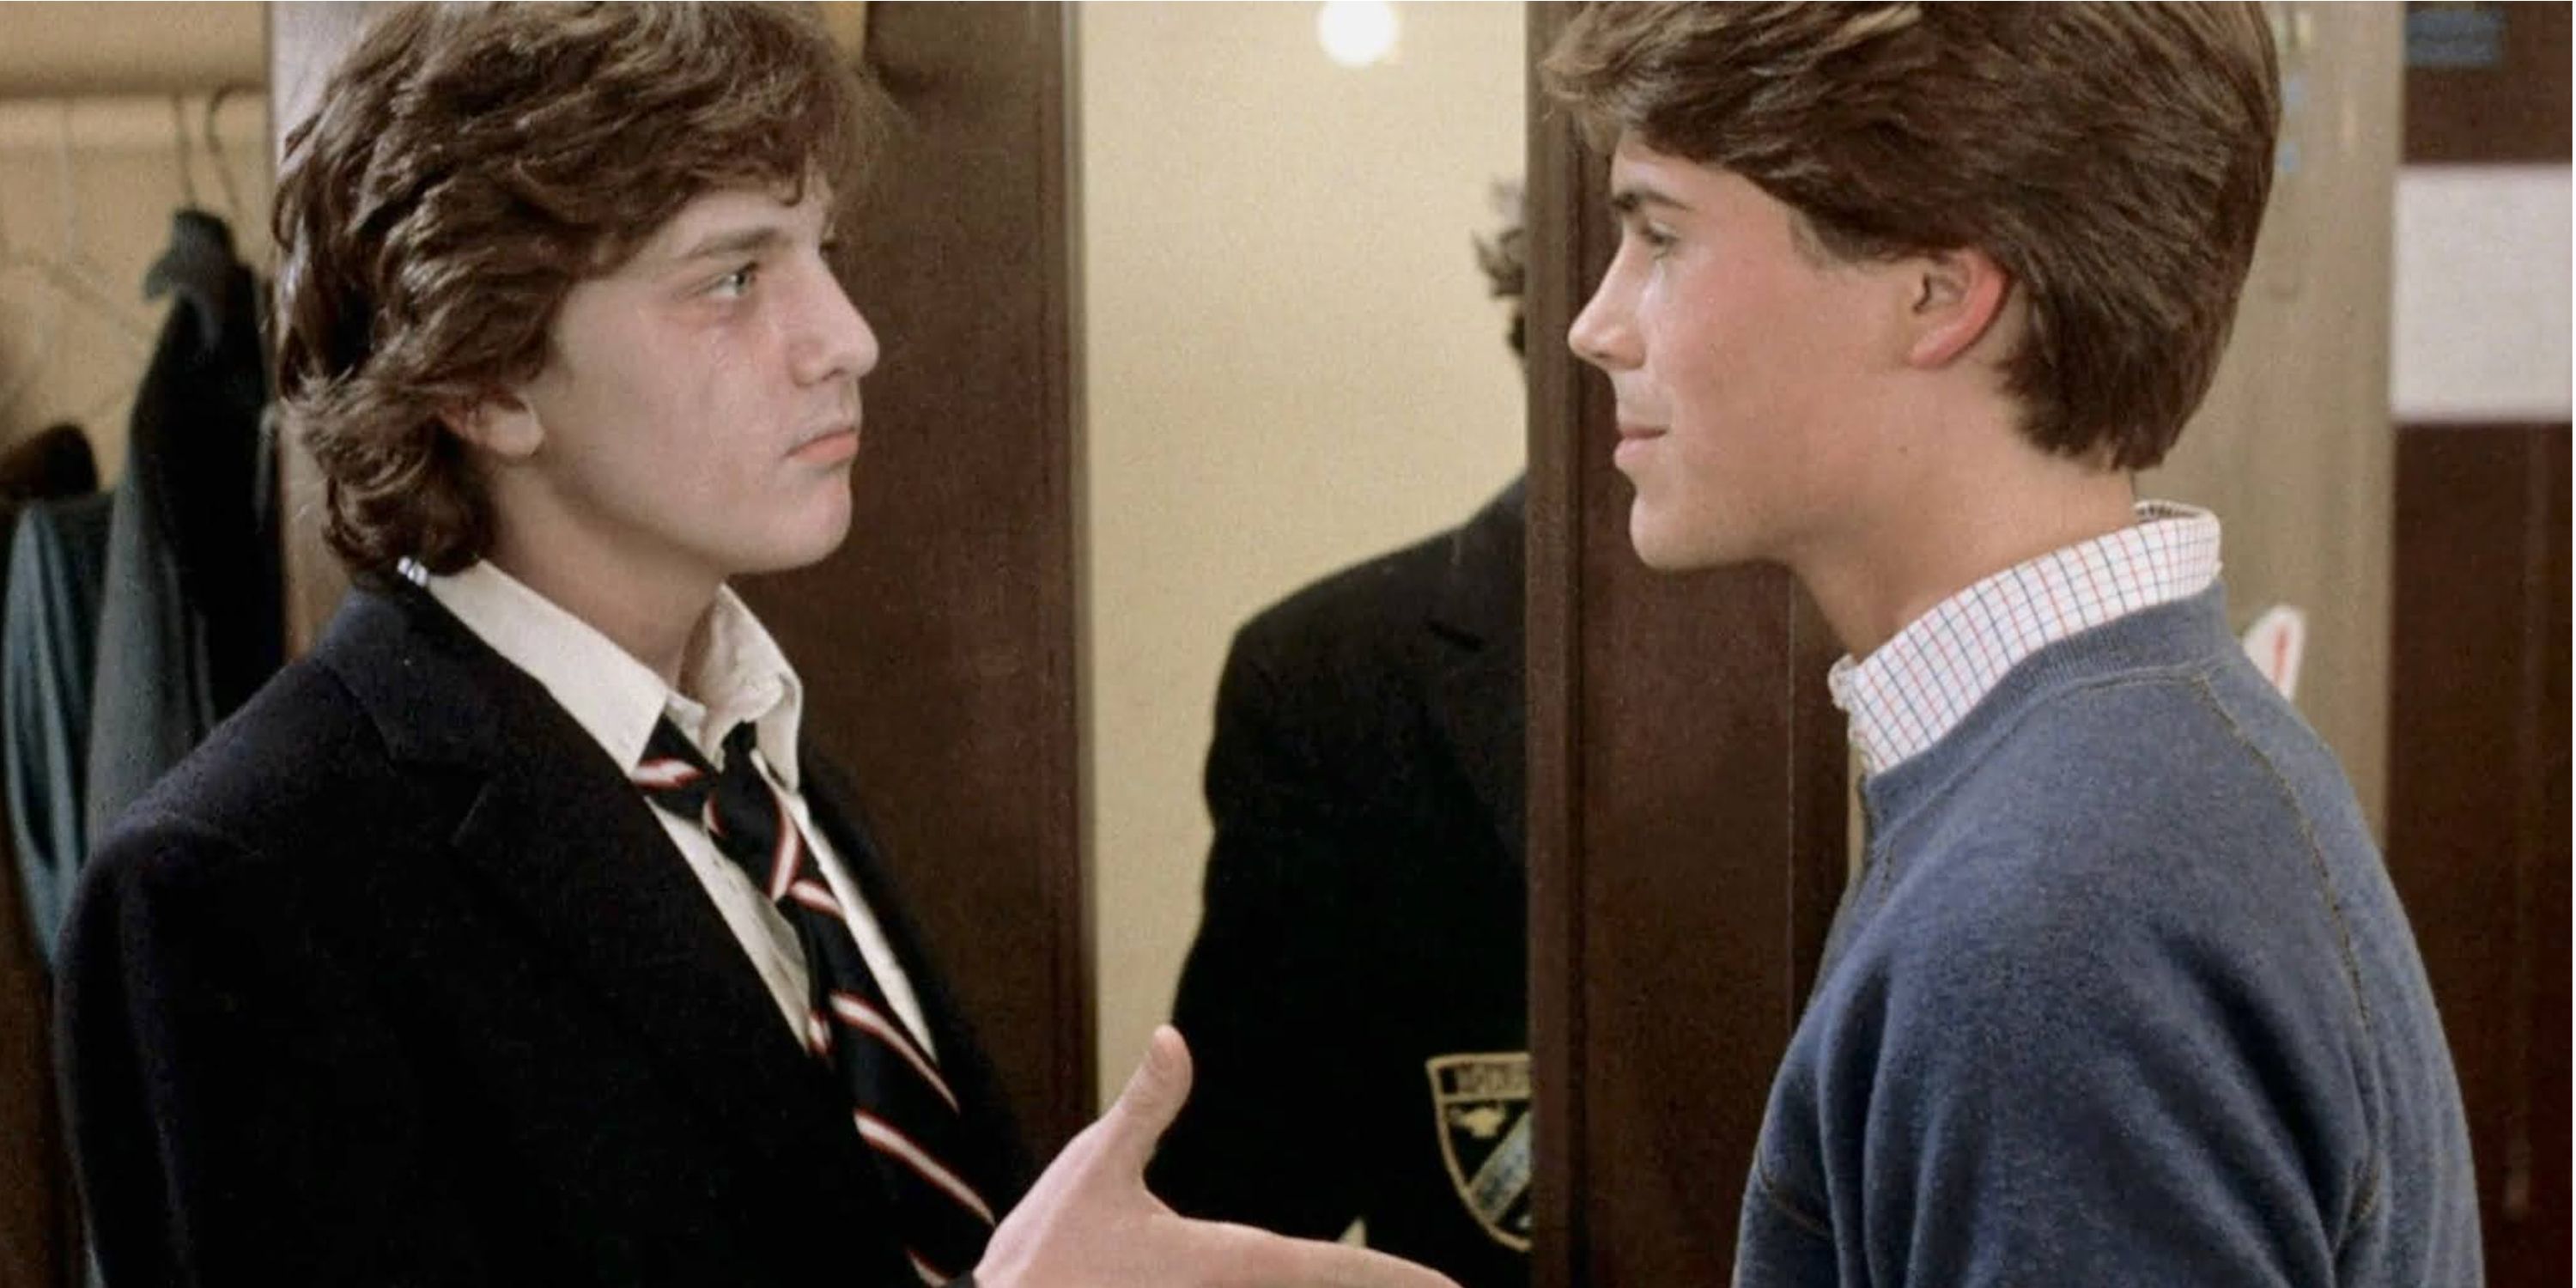 Class starring Rob Lowe and Andrew McCarthy